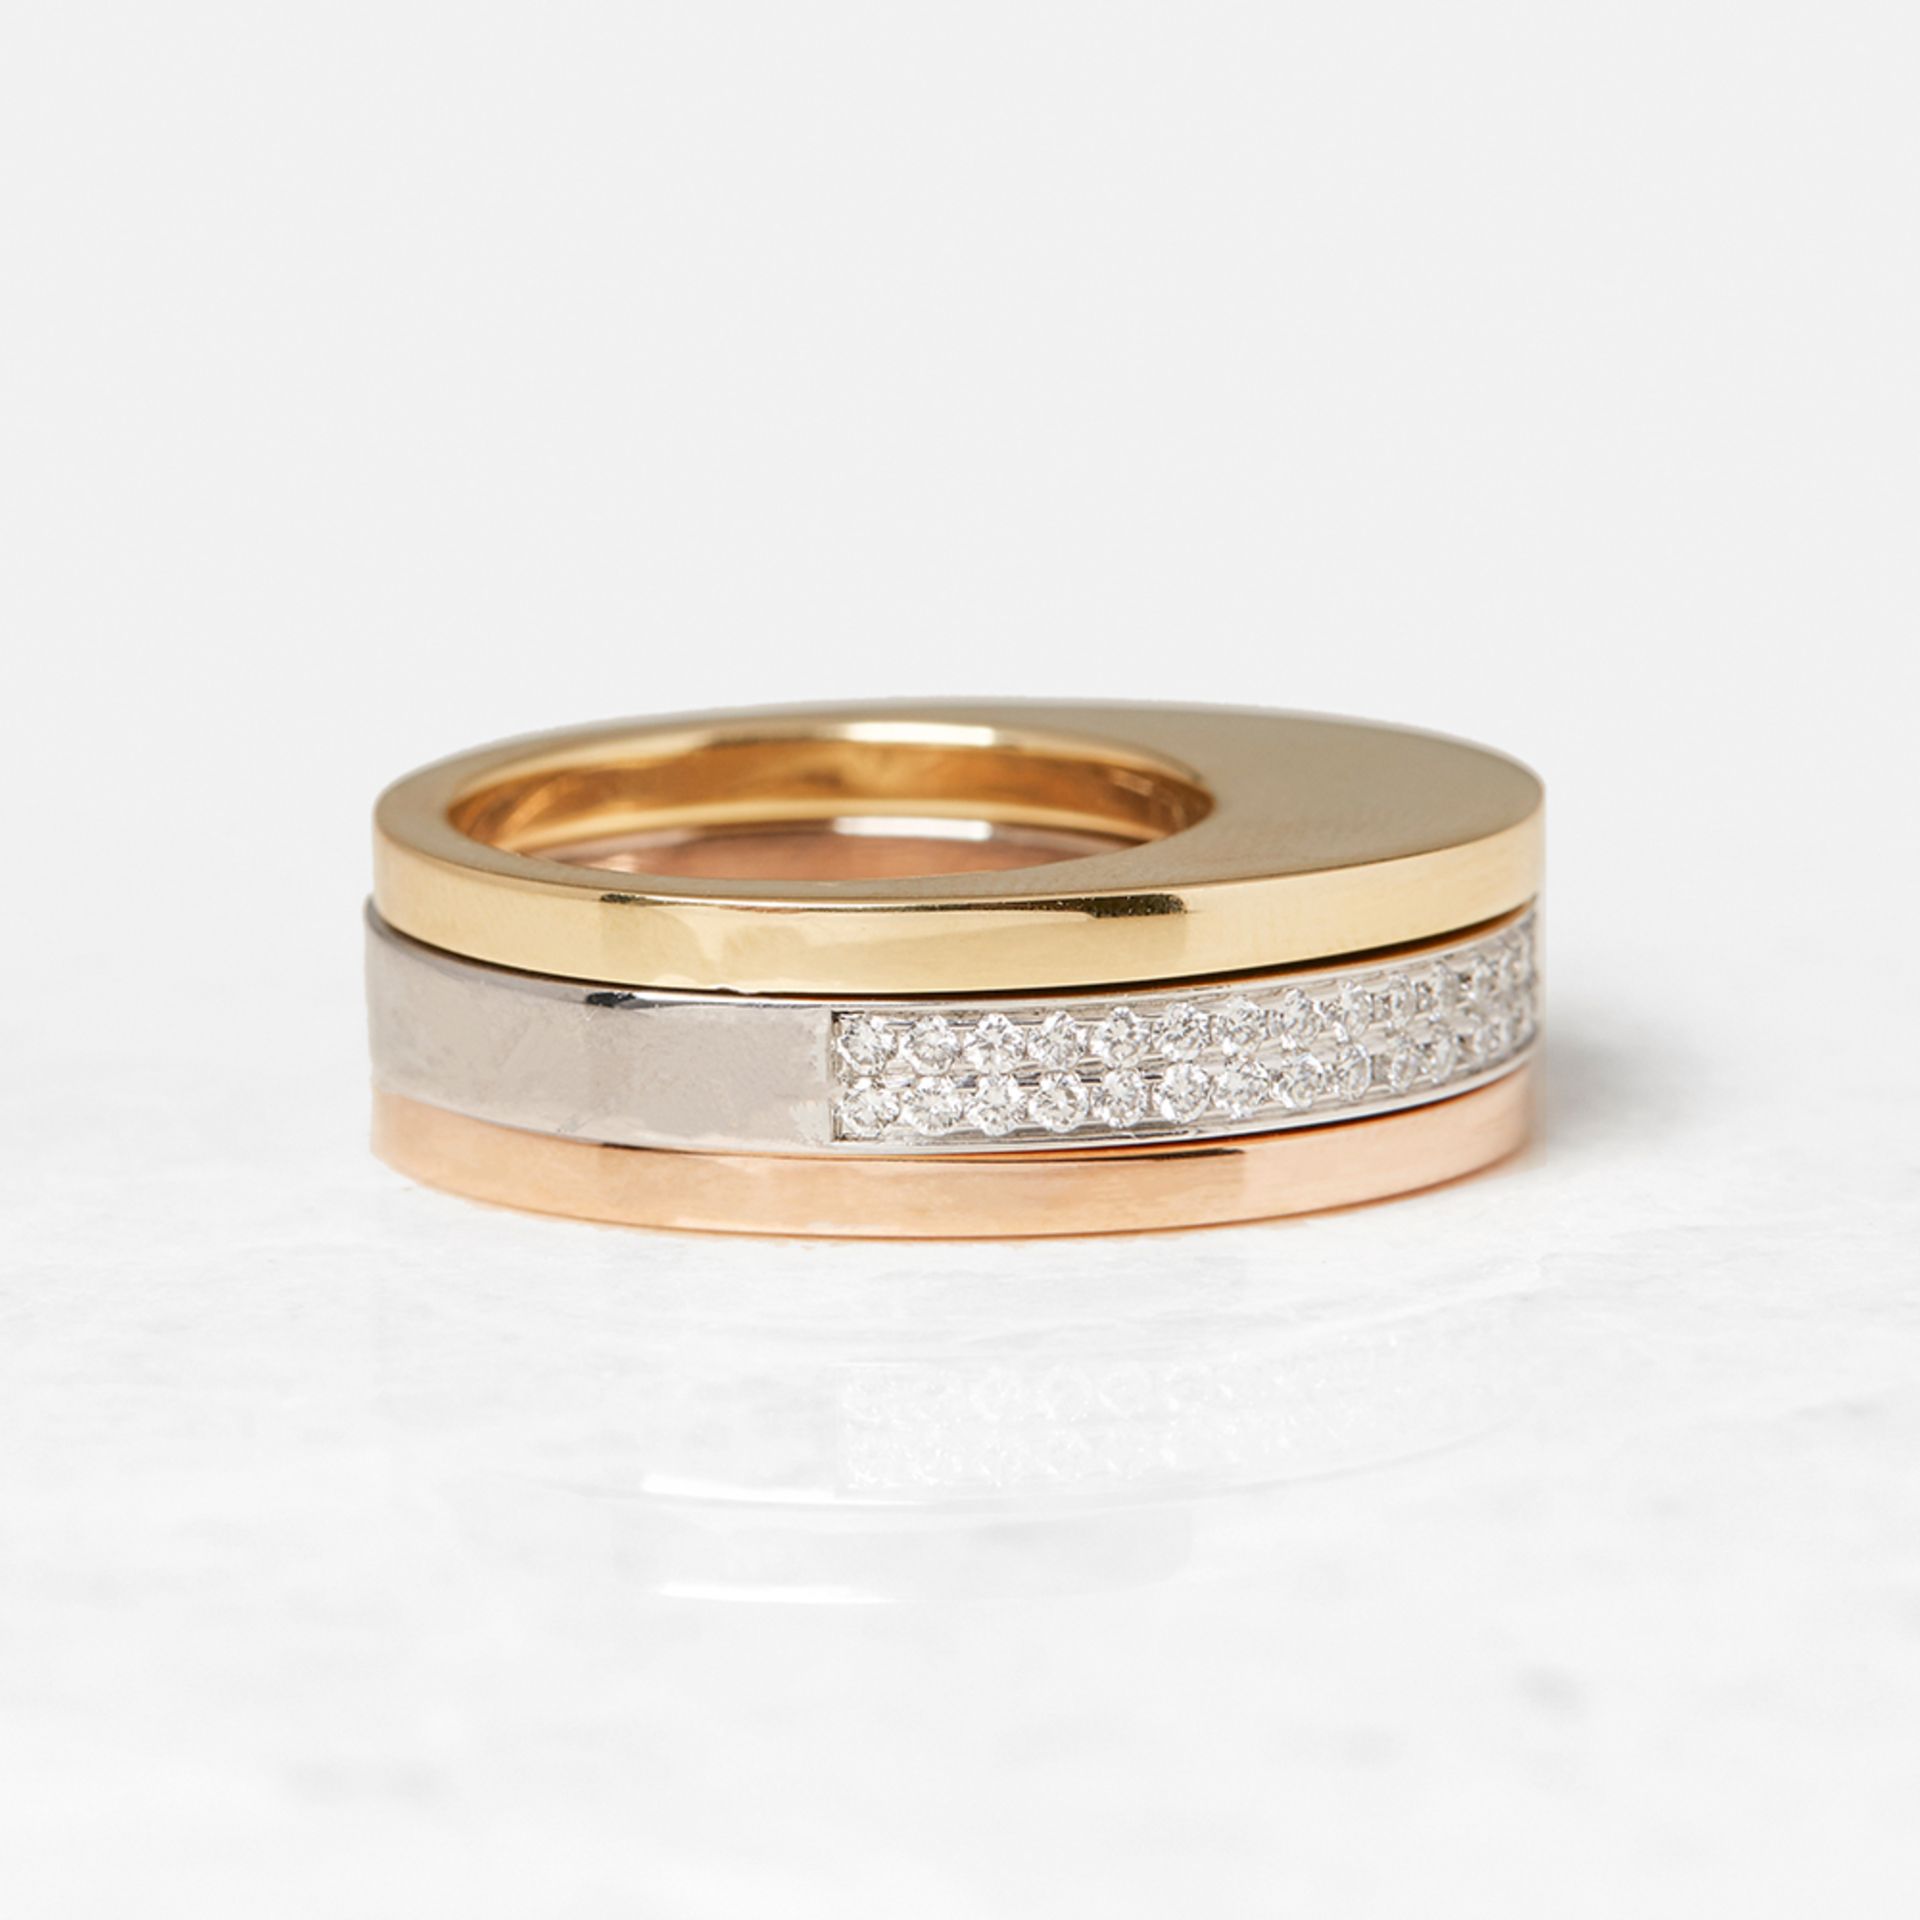 Tiffany & Co. 18k White, Rose & Yellow Gold Stackable Rings - Image 4 of 11